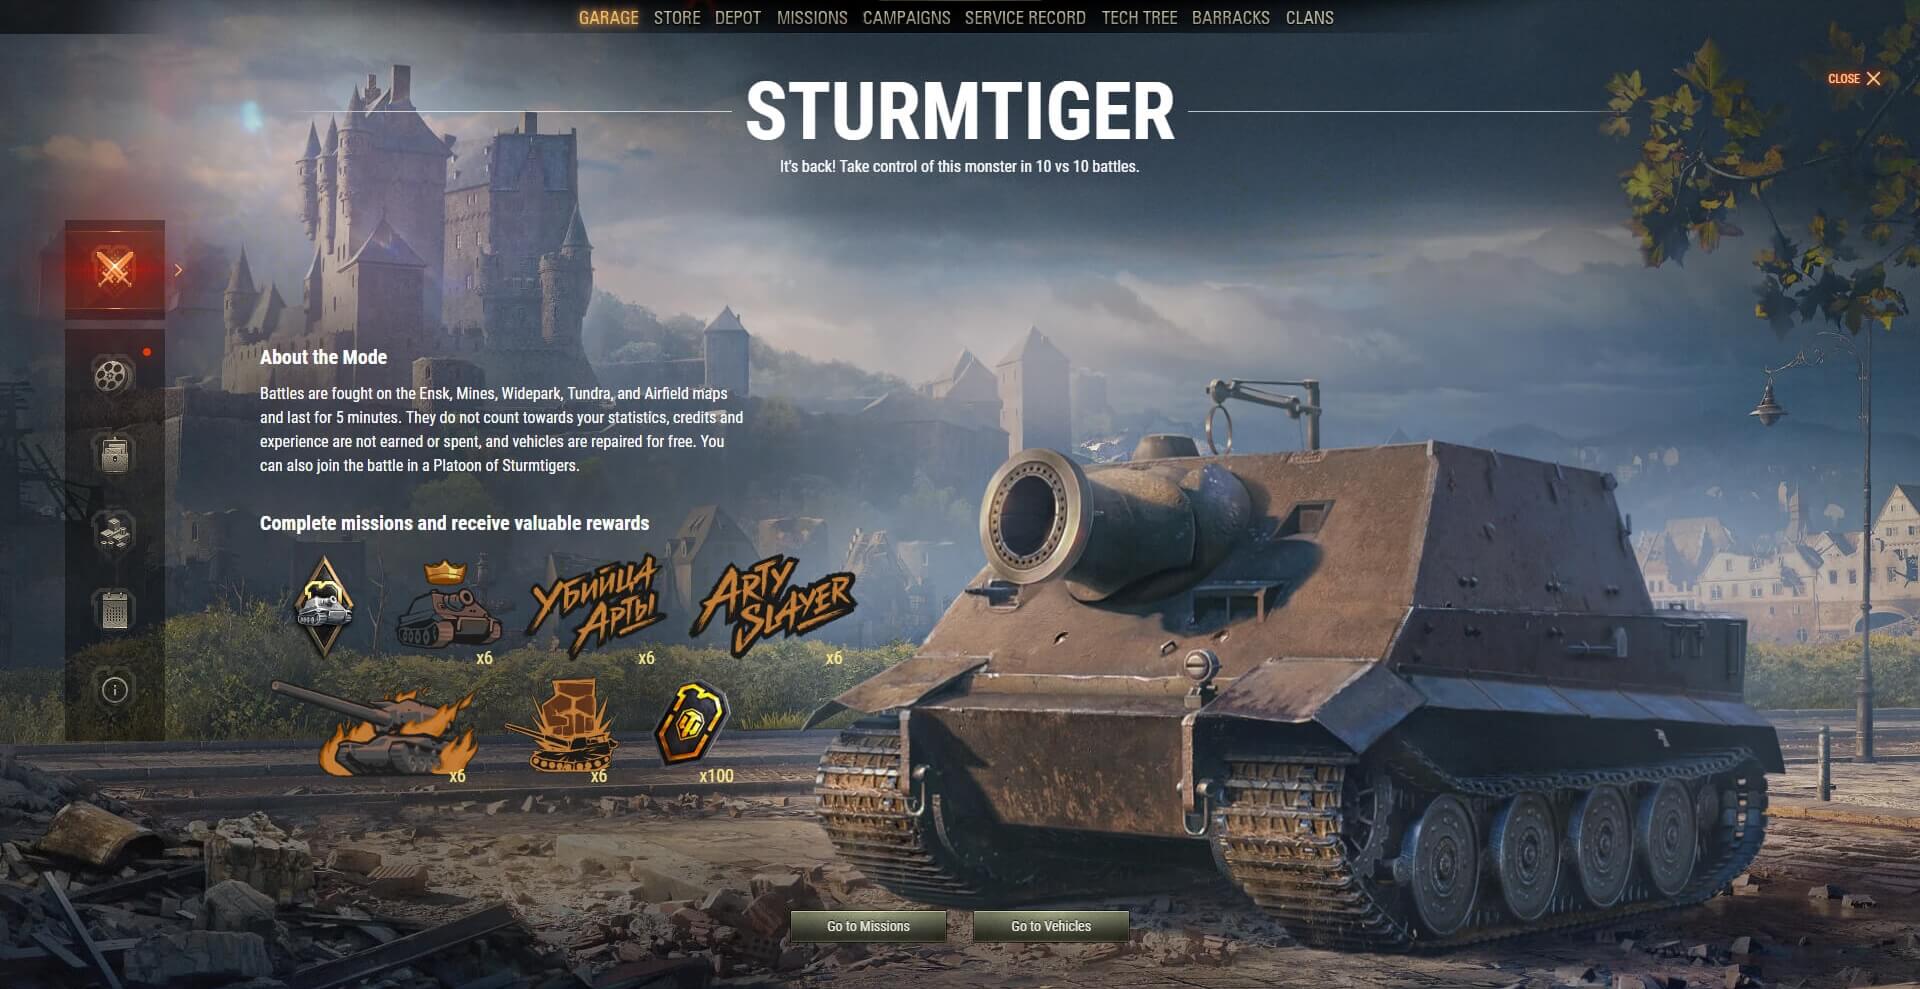 Act III. Tame the Crouching Sturmtiger!